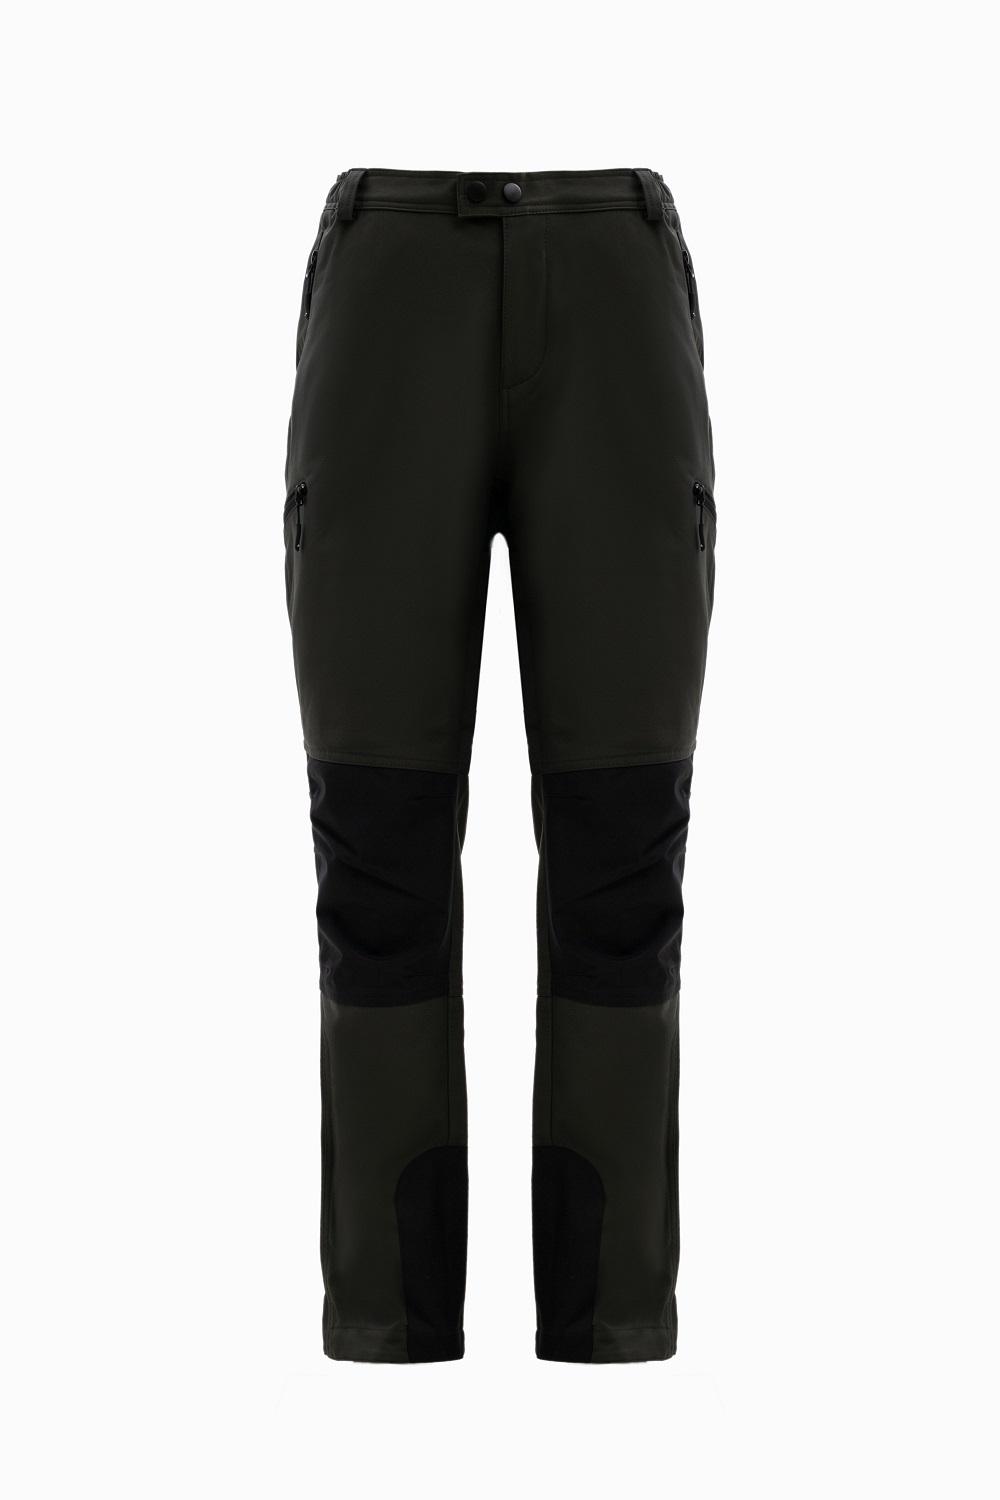 Tuxer Neo 2 Trousers